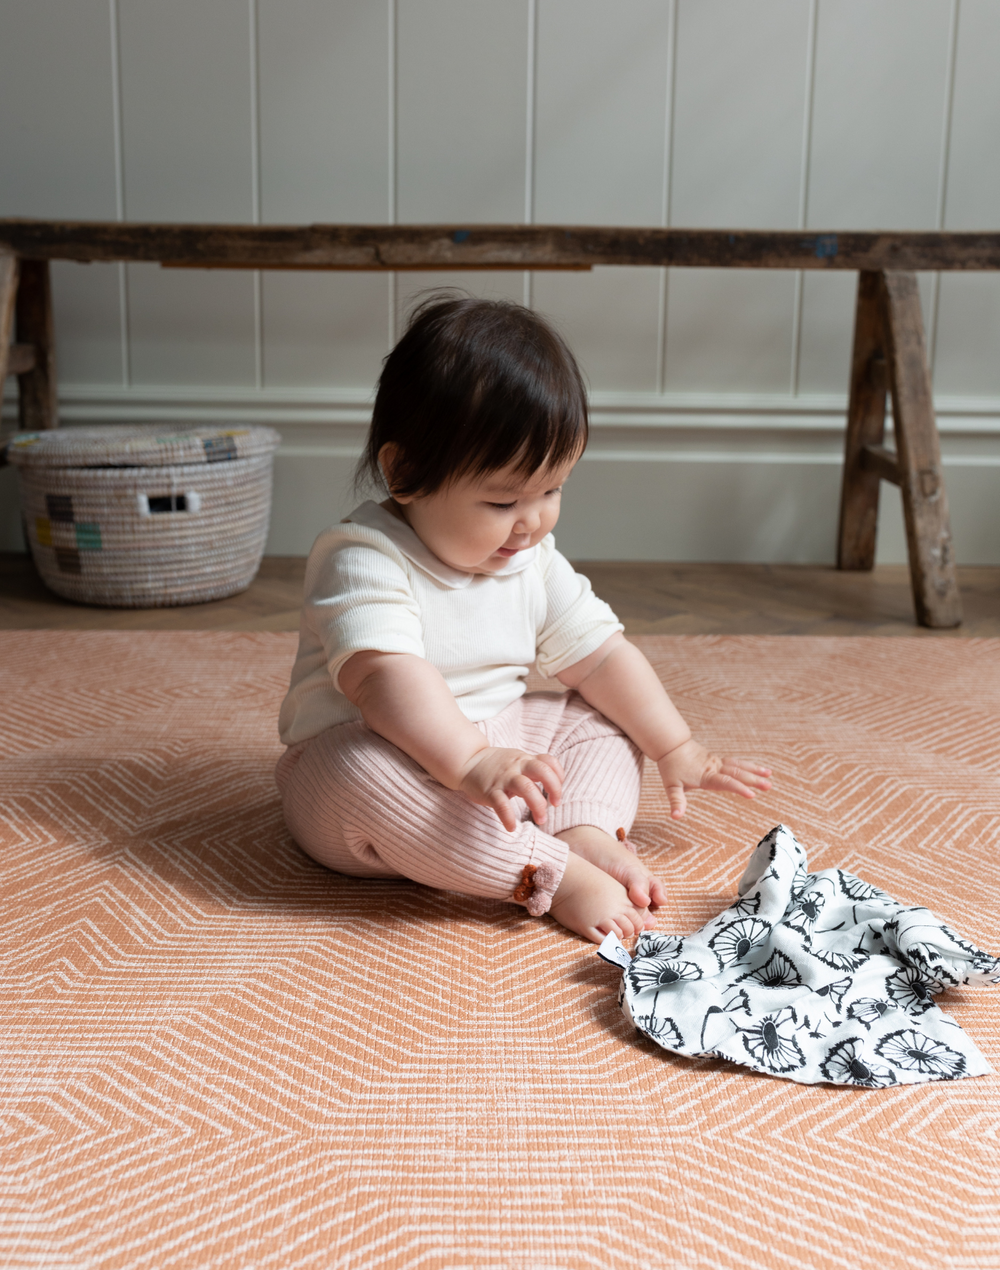 baby girl plays on kids play mat with a stylish orange design